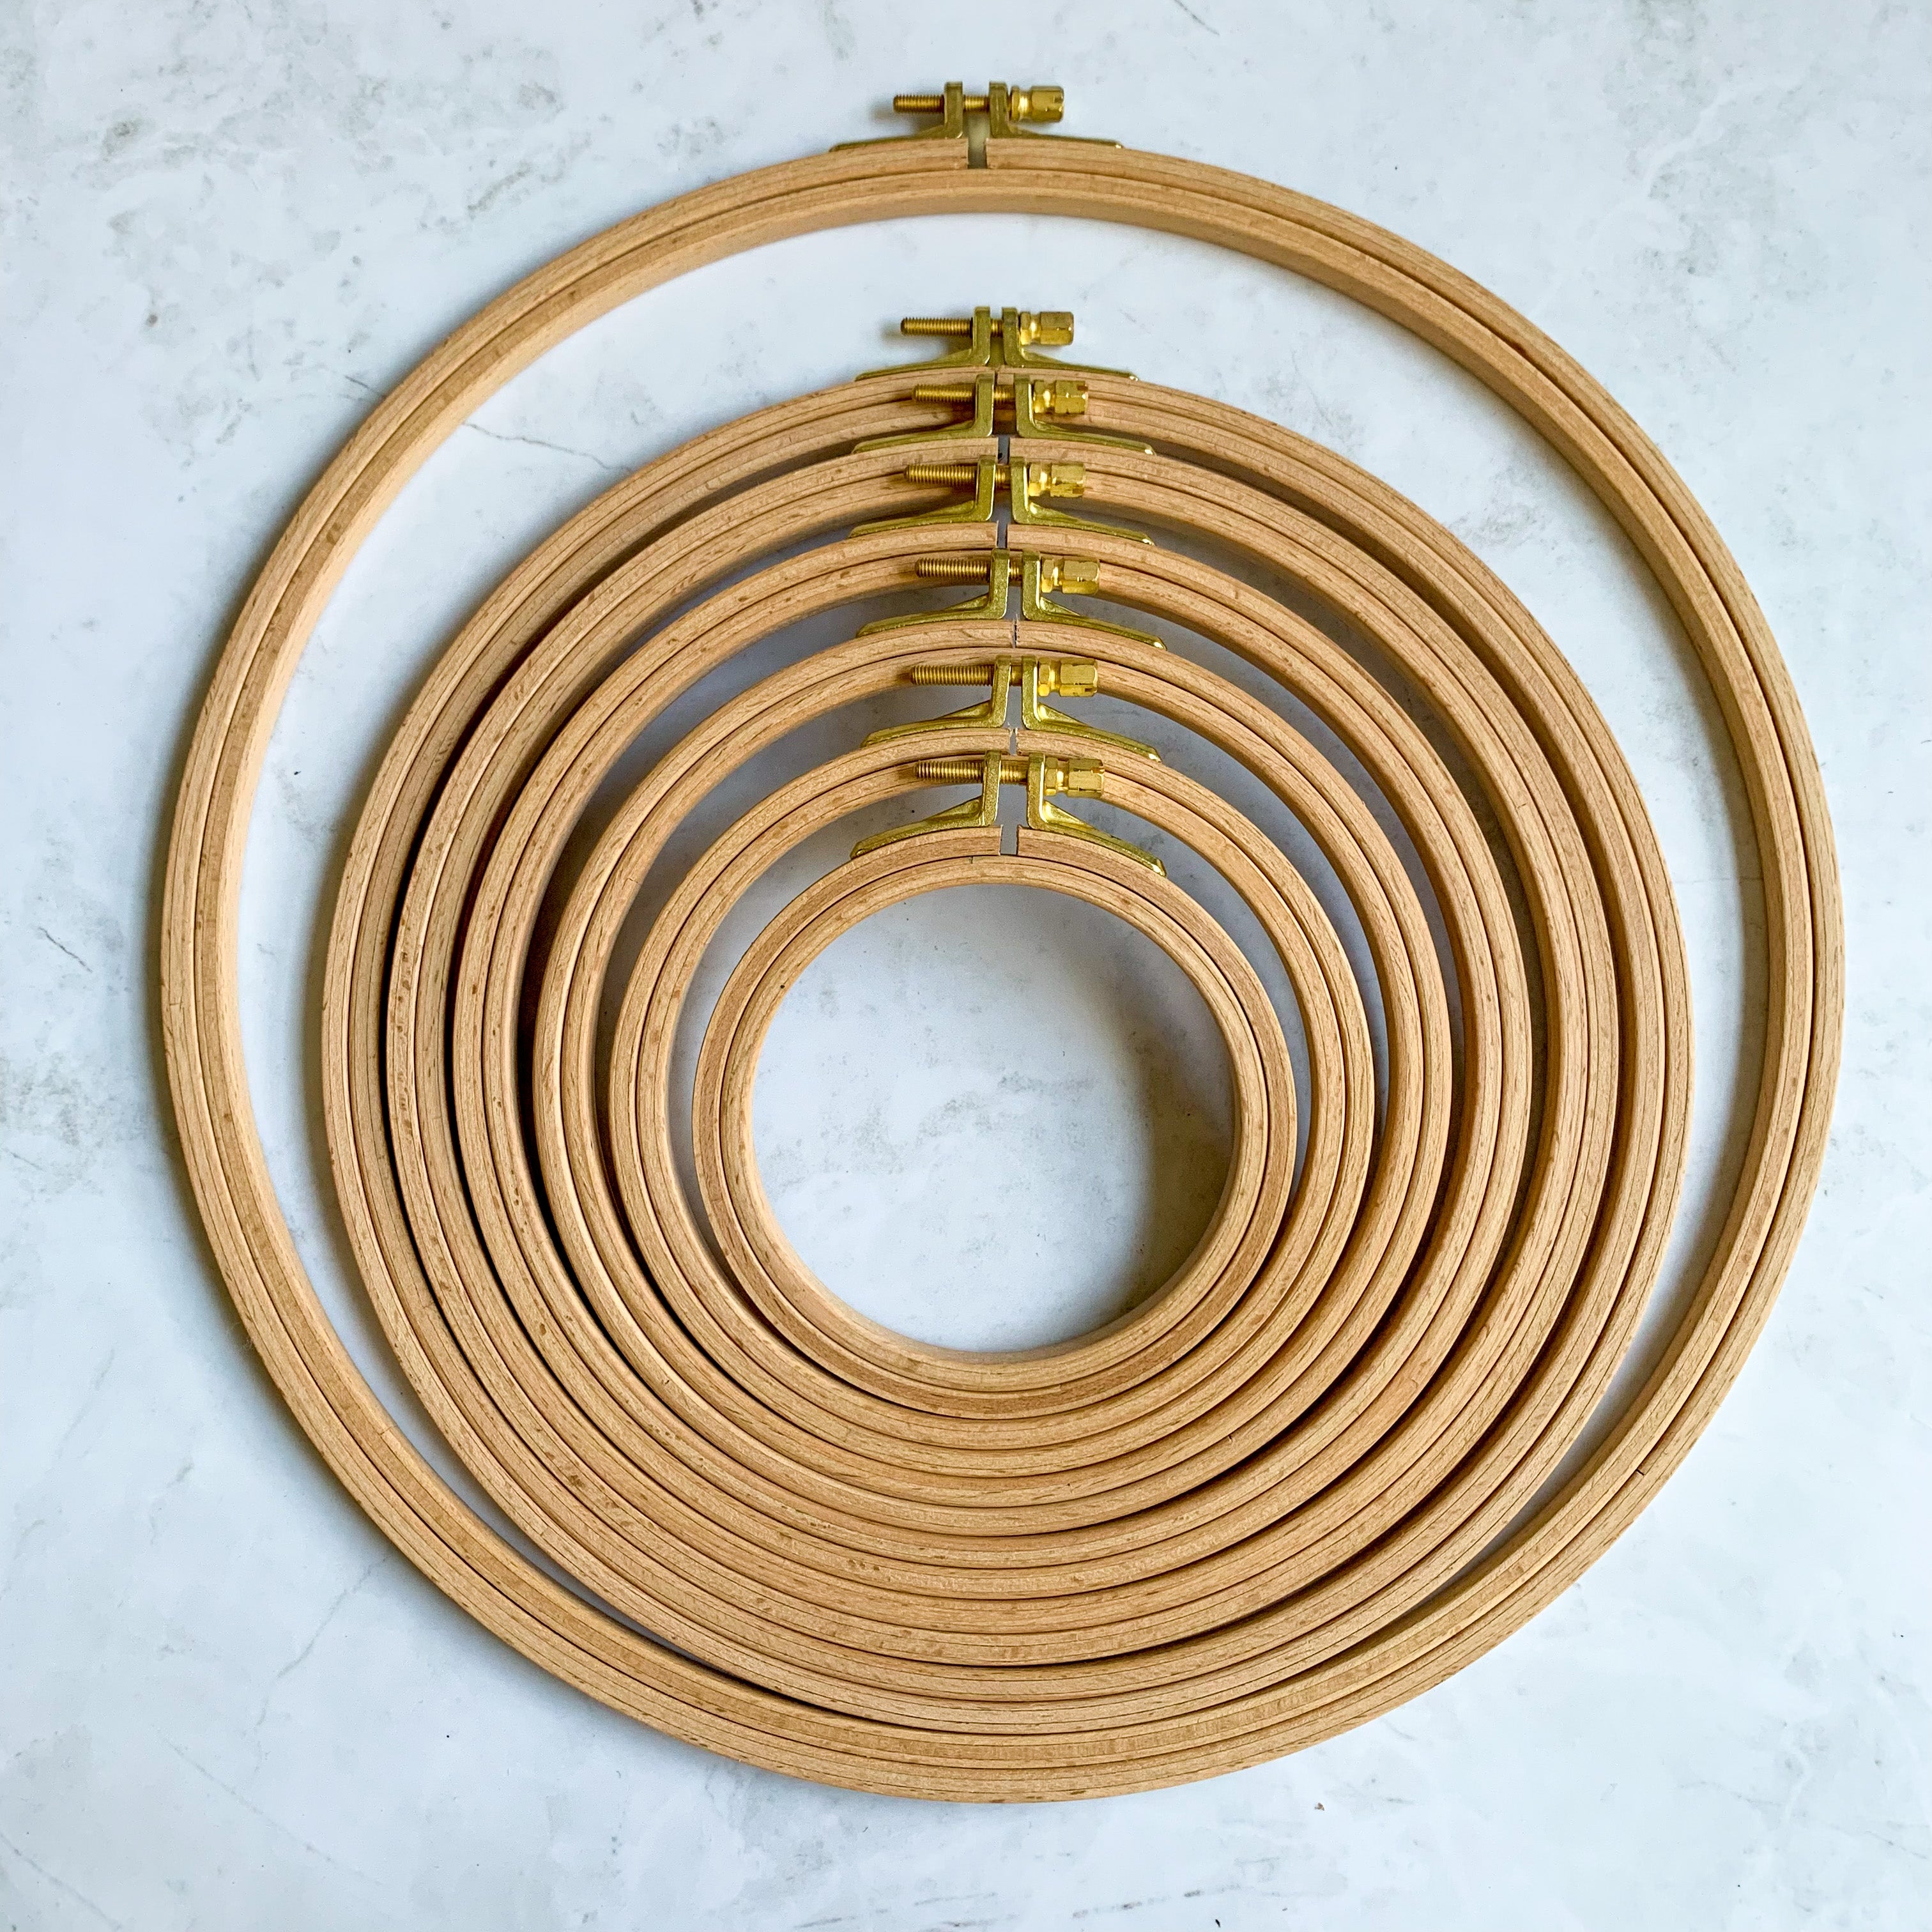 Nurge Wood Embroidery Hoops with Screw 16mm height - Price, description and  photos ➽ Inspiration Crafts